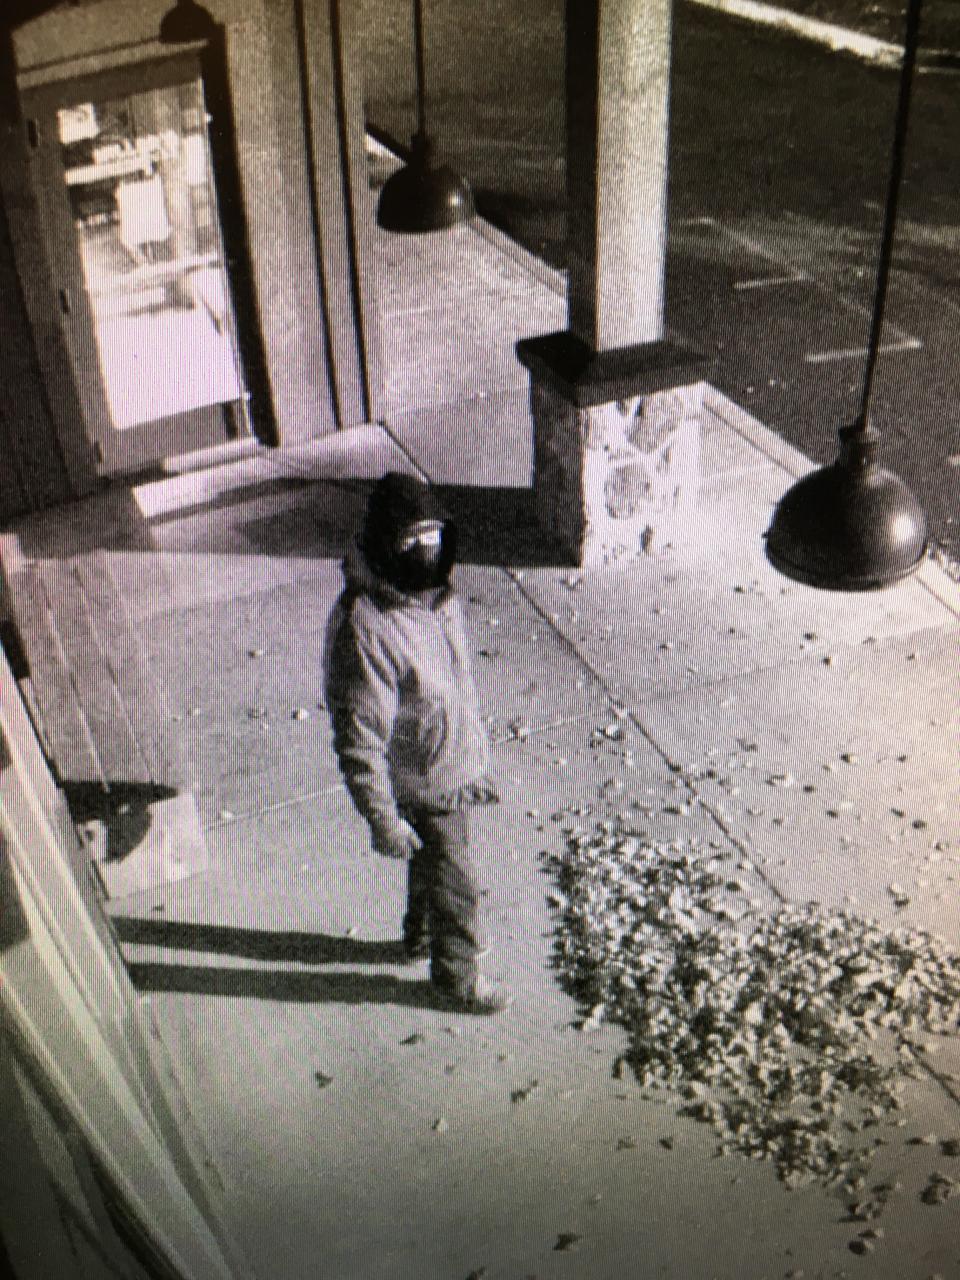 The Delaware State Fire Marshal's Office released a security camera photo of a suspect in the Nov. 24, 2021, arson at Miller's Ale House restaurant in Stanton. The camera showed the person was at the restaurant before and during the fire, officials said.